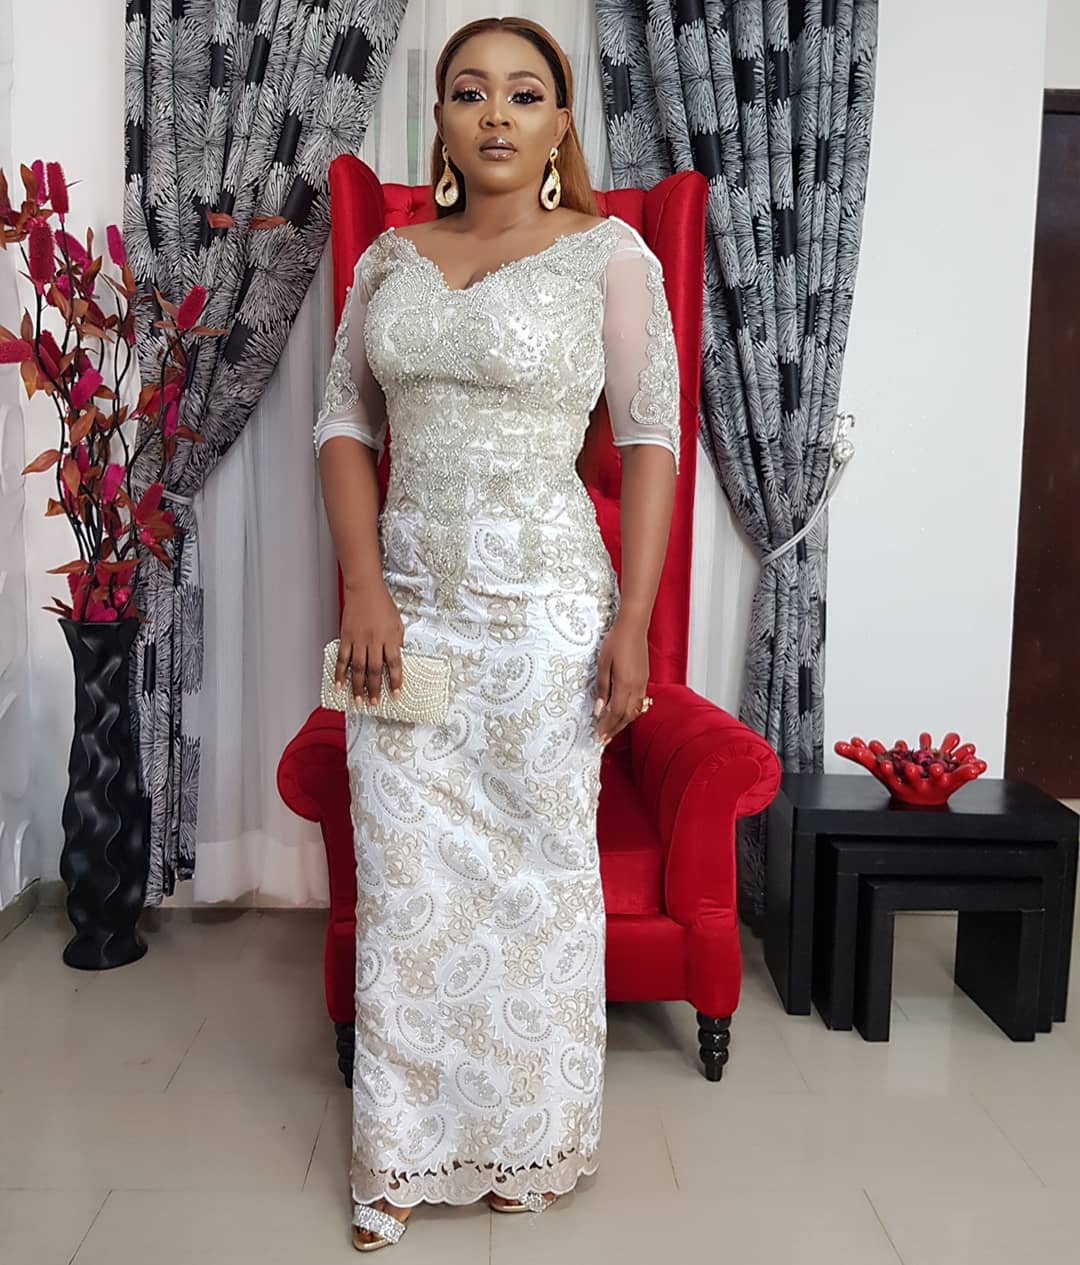 Mercy Aigbe Dazzles In New Photos